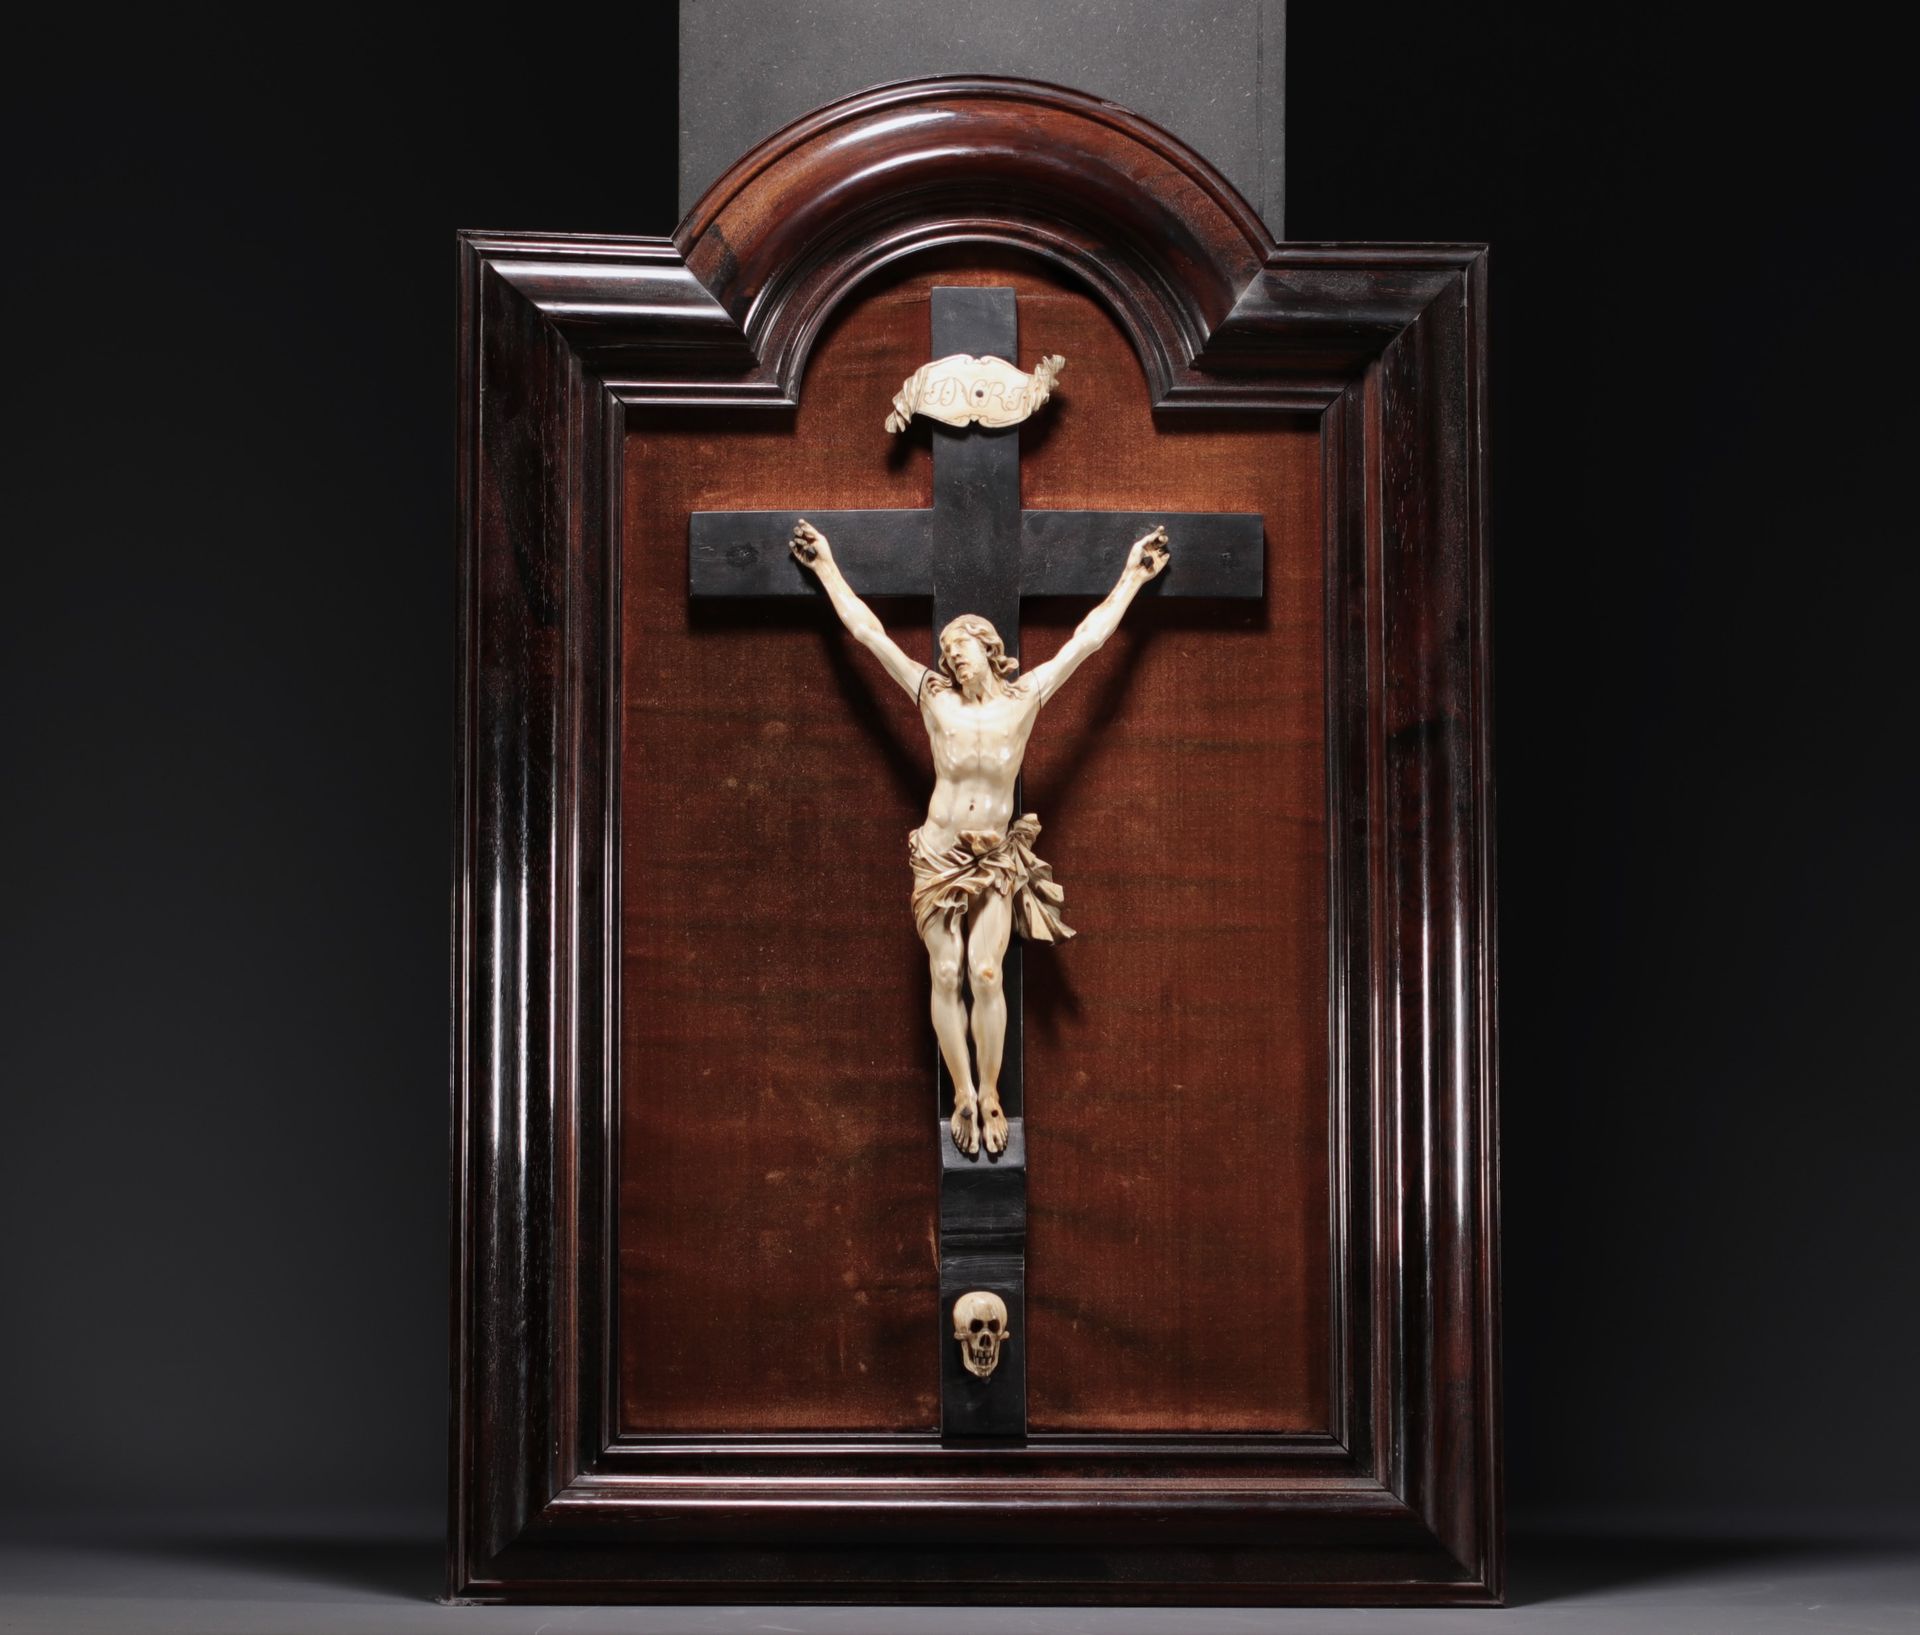 Null Christ in ivory from the 18th century
重量: 3.82 kg
无法送货
尺寸: H 750MM X L 515M&hellip;